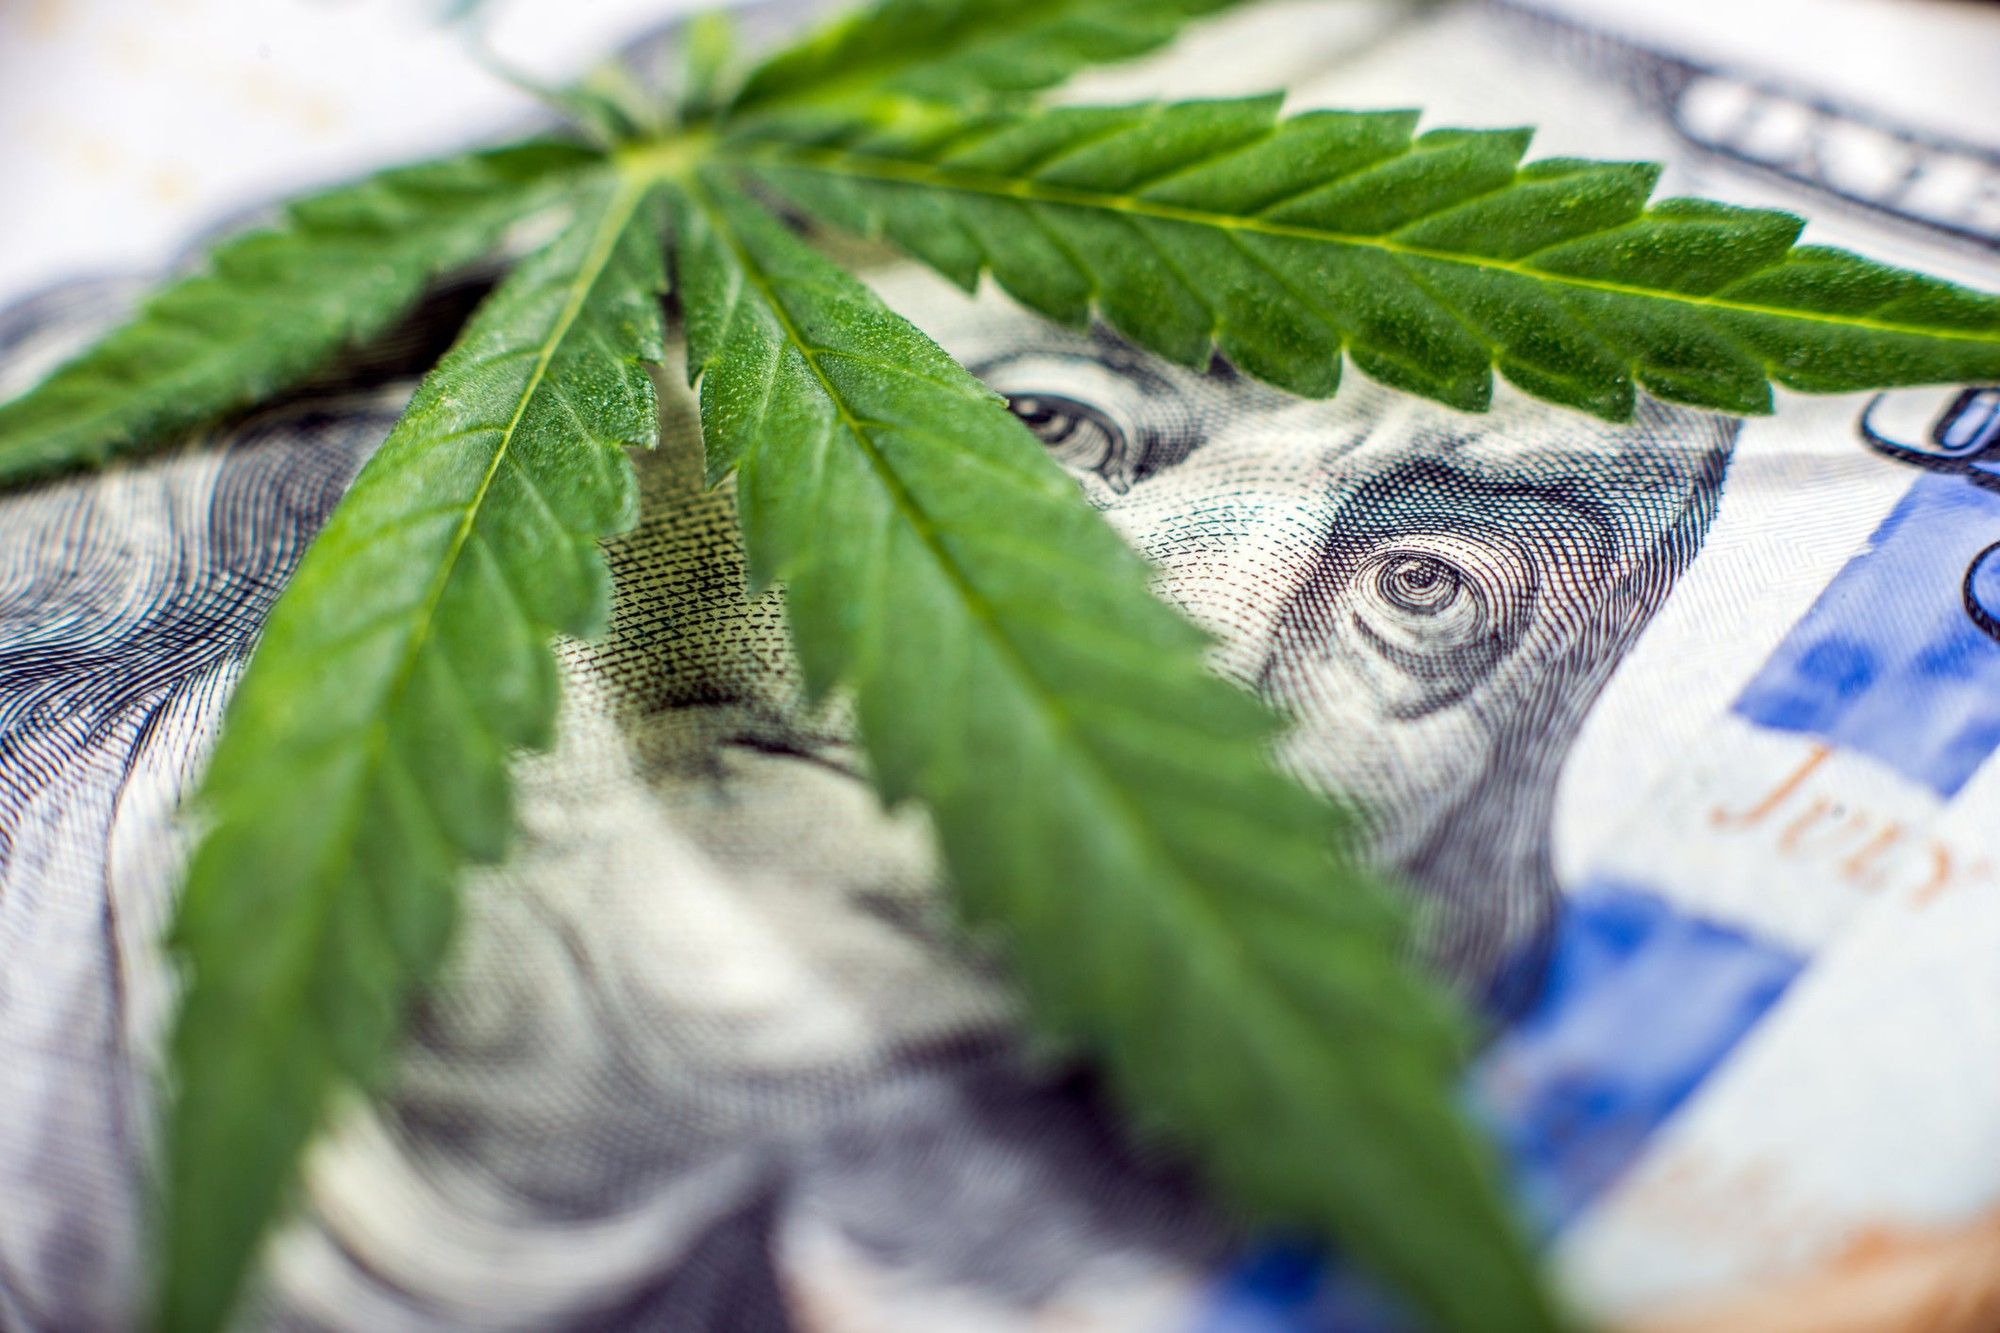 A cannabis leaf lying atop a one hundred dollar bill, with Ben Franklin's eyes peering between the leaves.